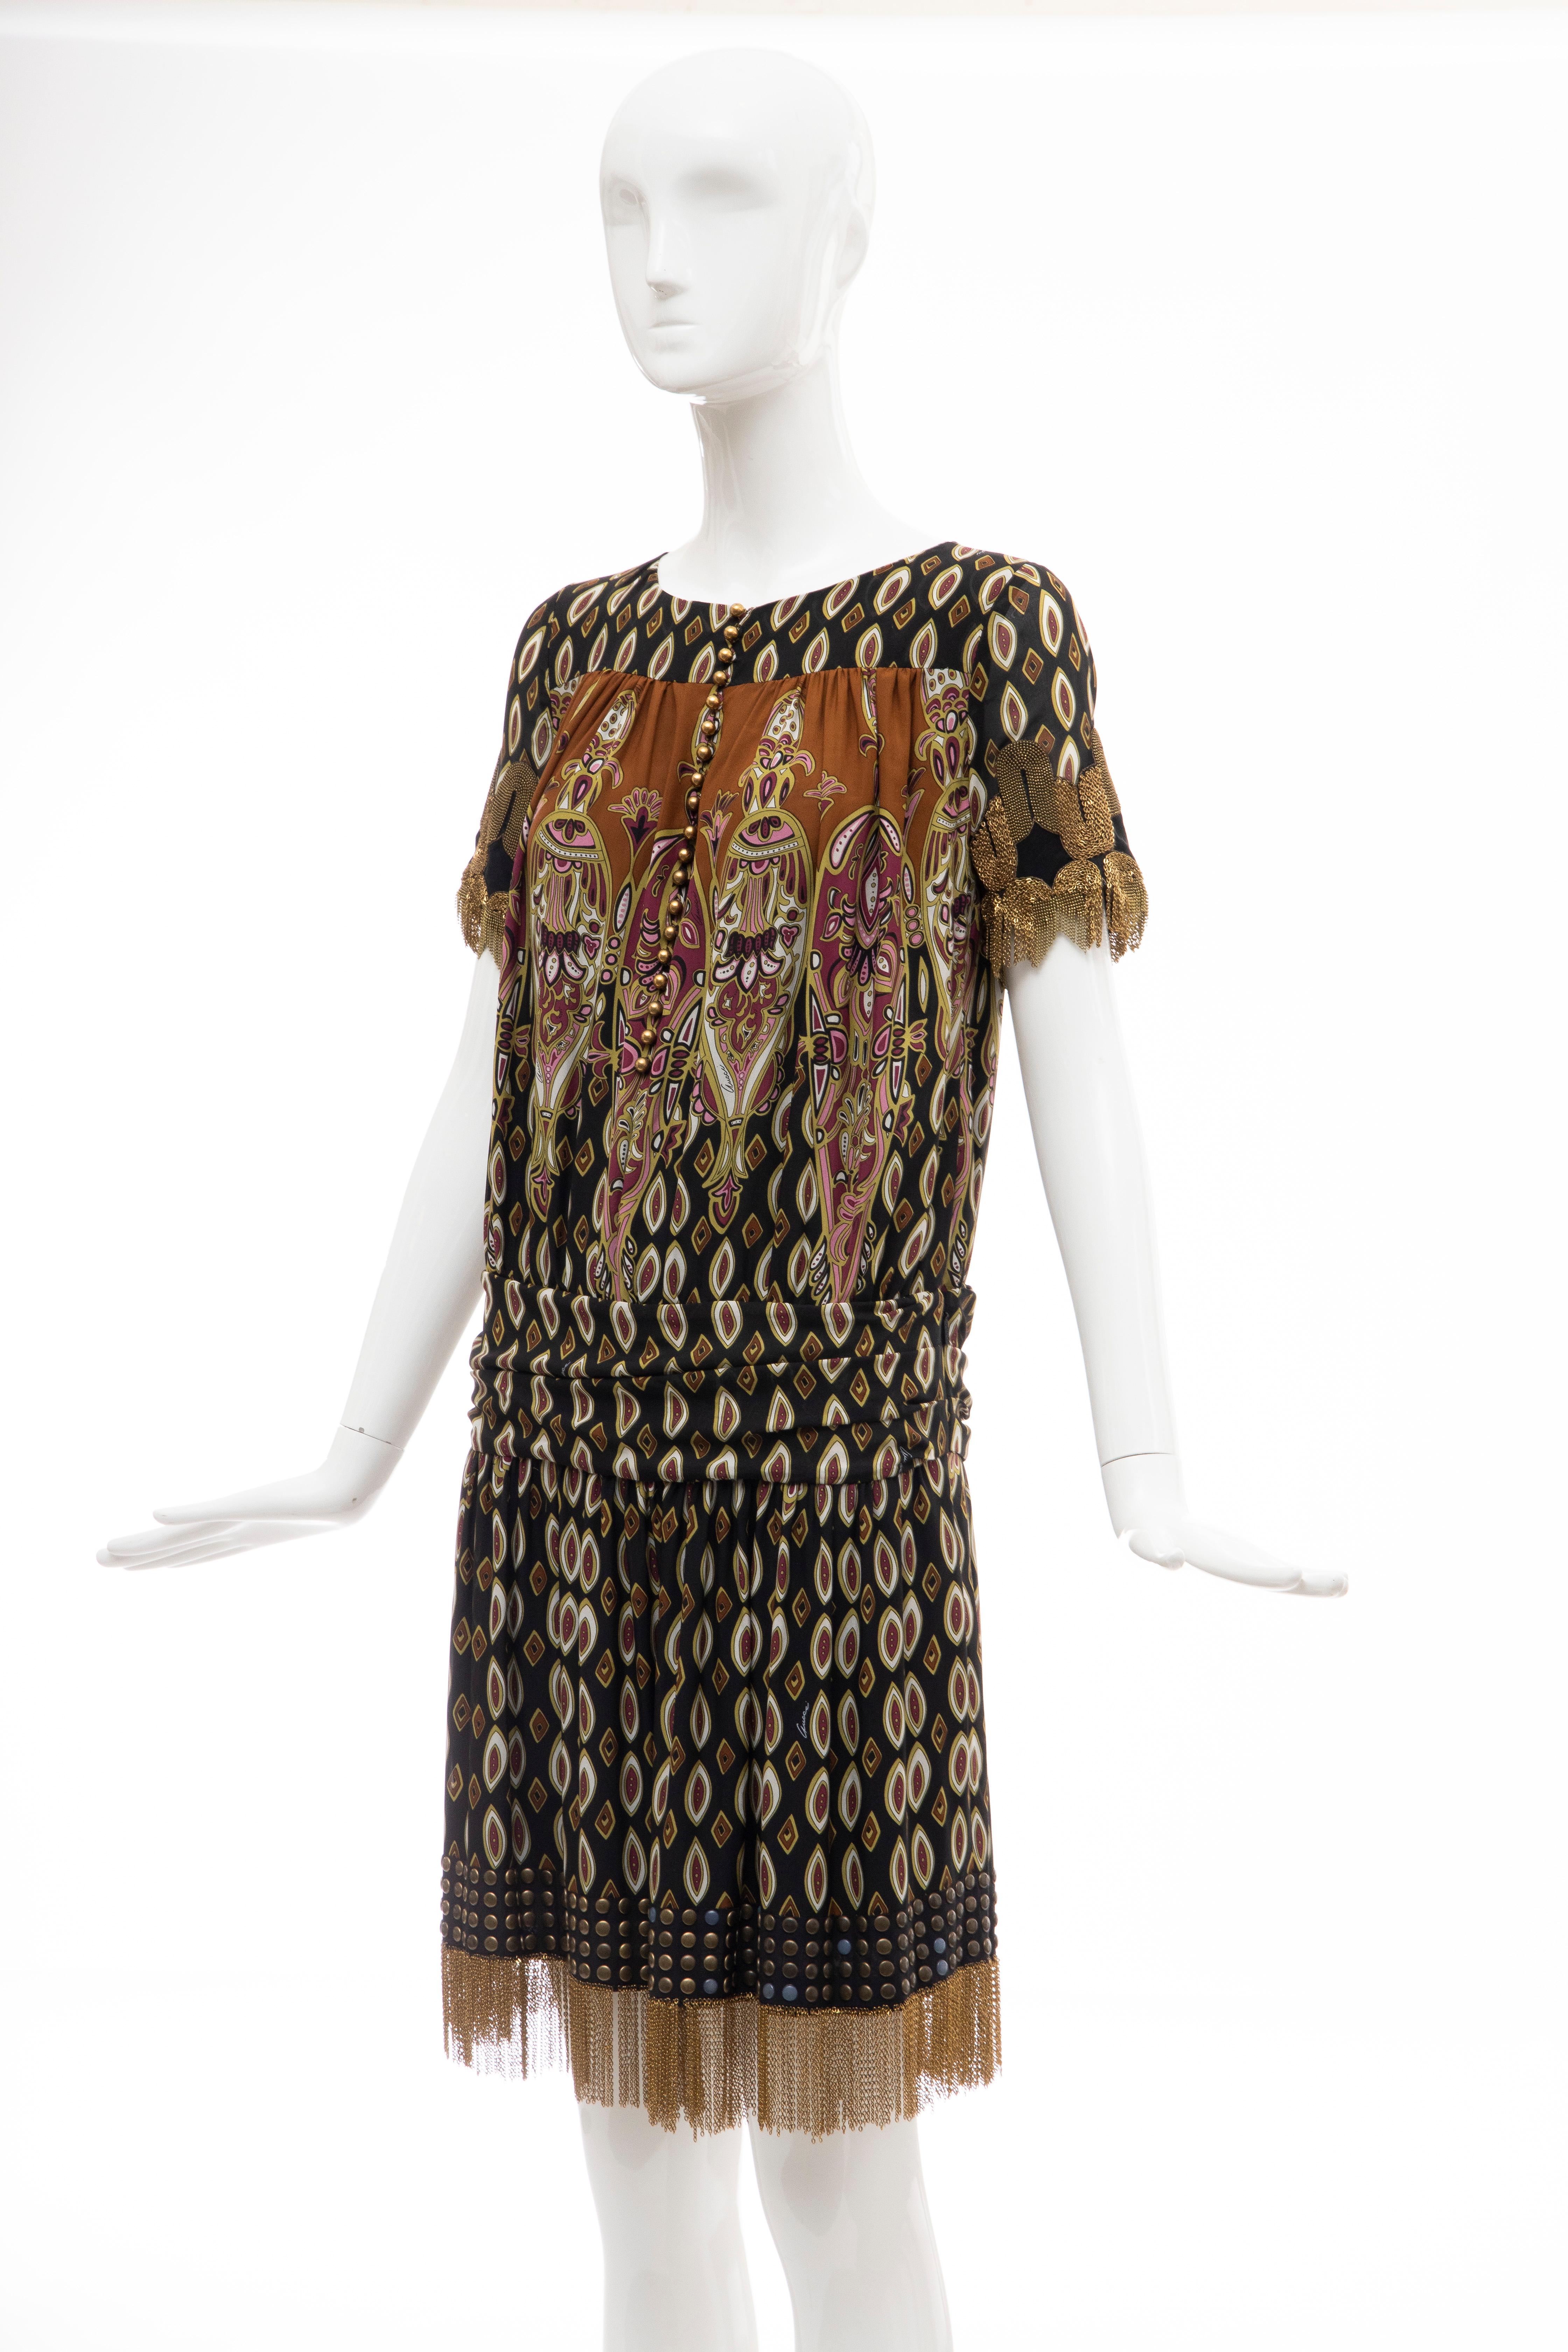 Frida Giannini for Gucci Runway Silk Boteh Pattern Brass Chains Dress, Fall 2008 For Sale 6